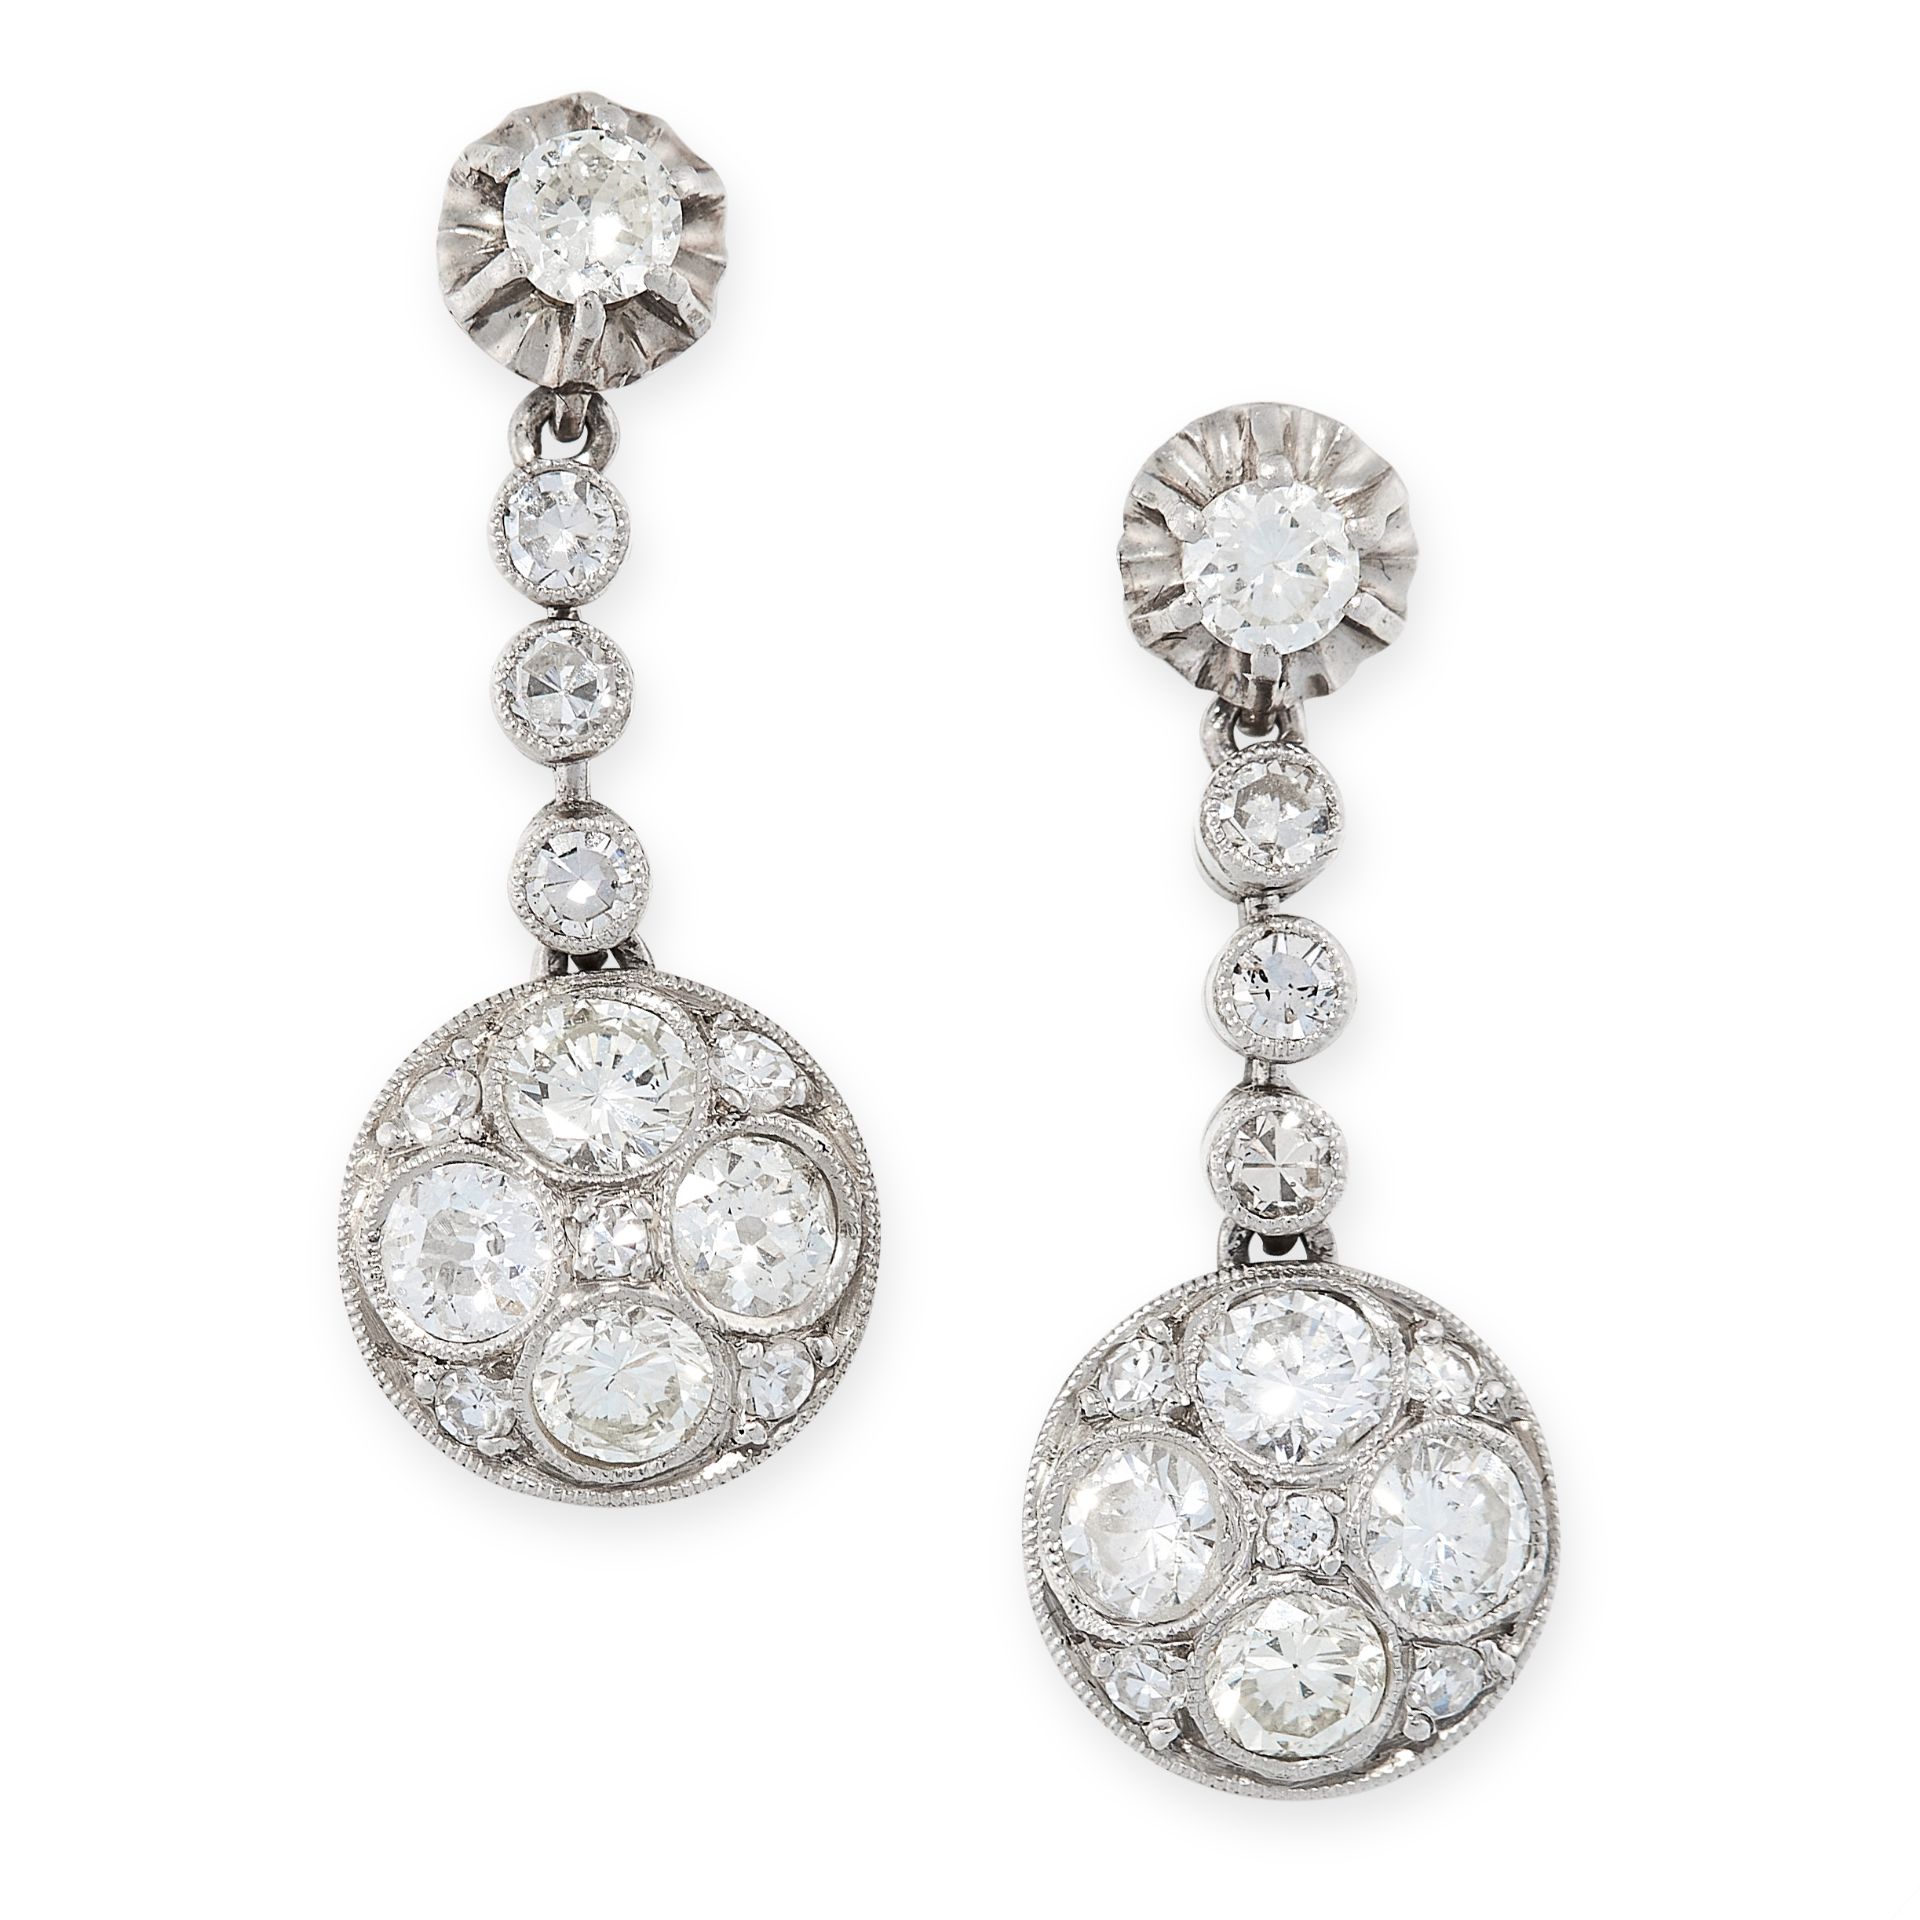 A PAIR OF ANTIQUE DIAMOND DROP EARRINGS, EARLY 20TH CENTURY each formed of a circular link set